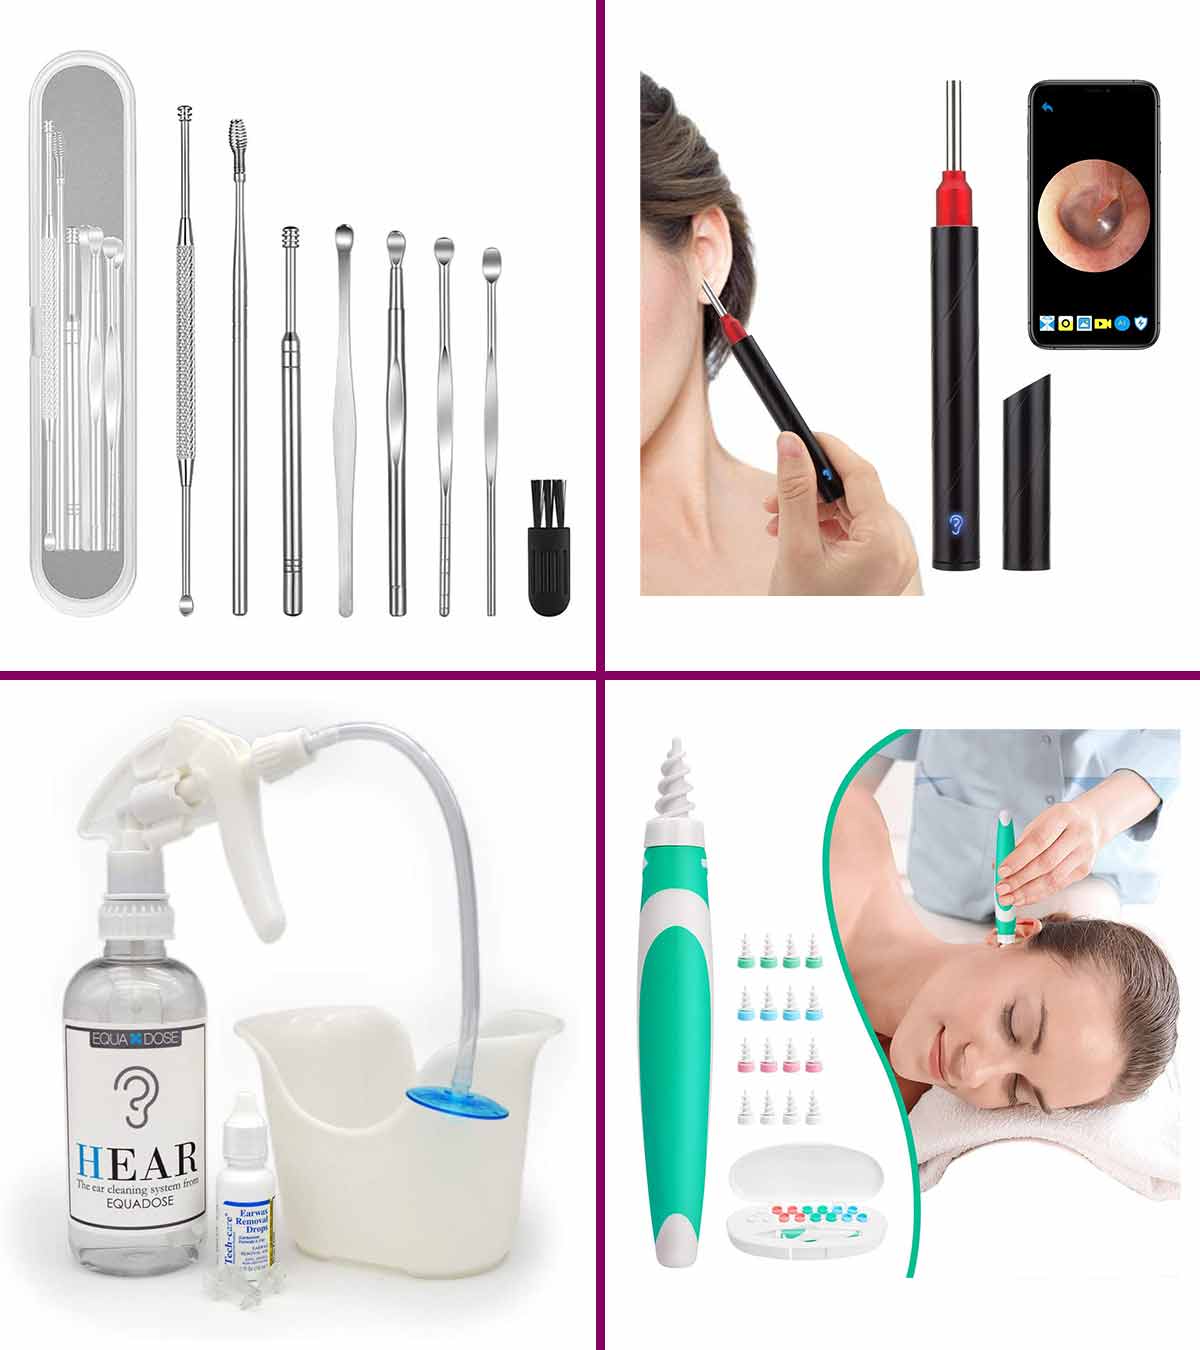 Top 5 Best Ear Wax Removal Camera for iPhone, iPad, Android Phones